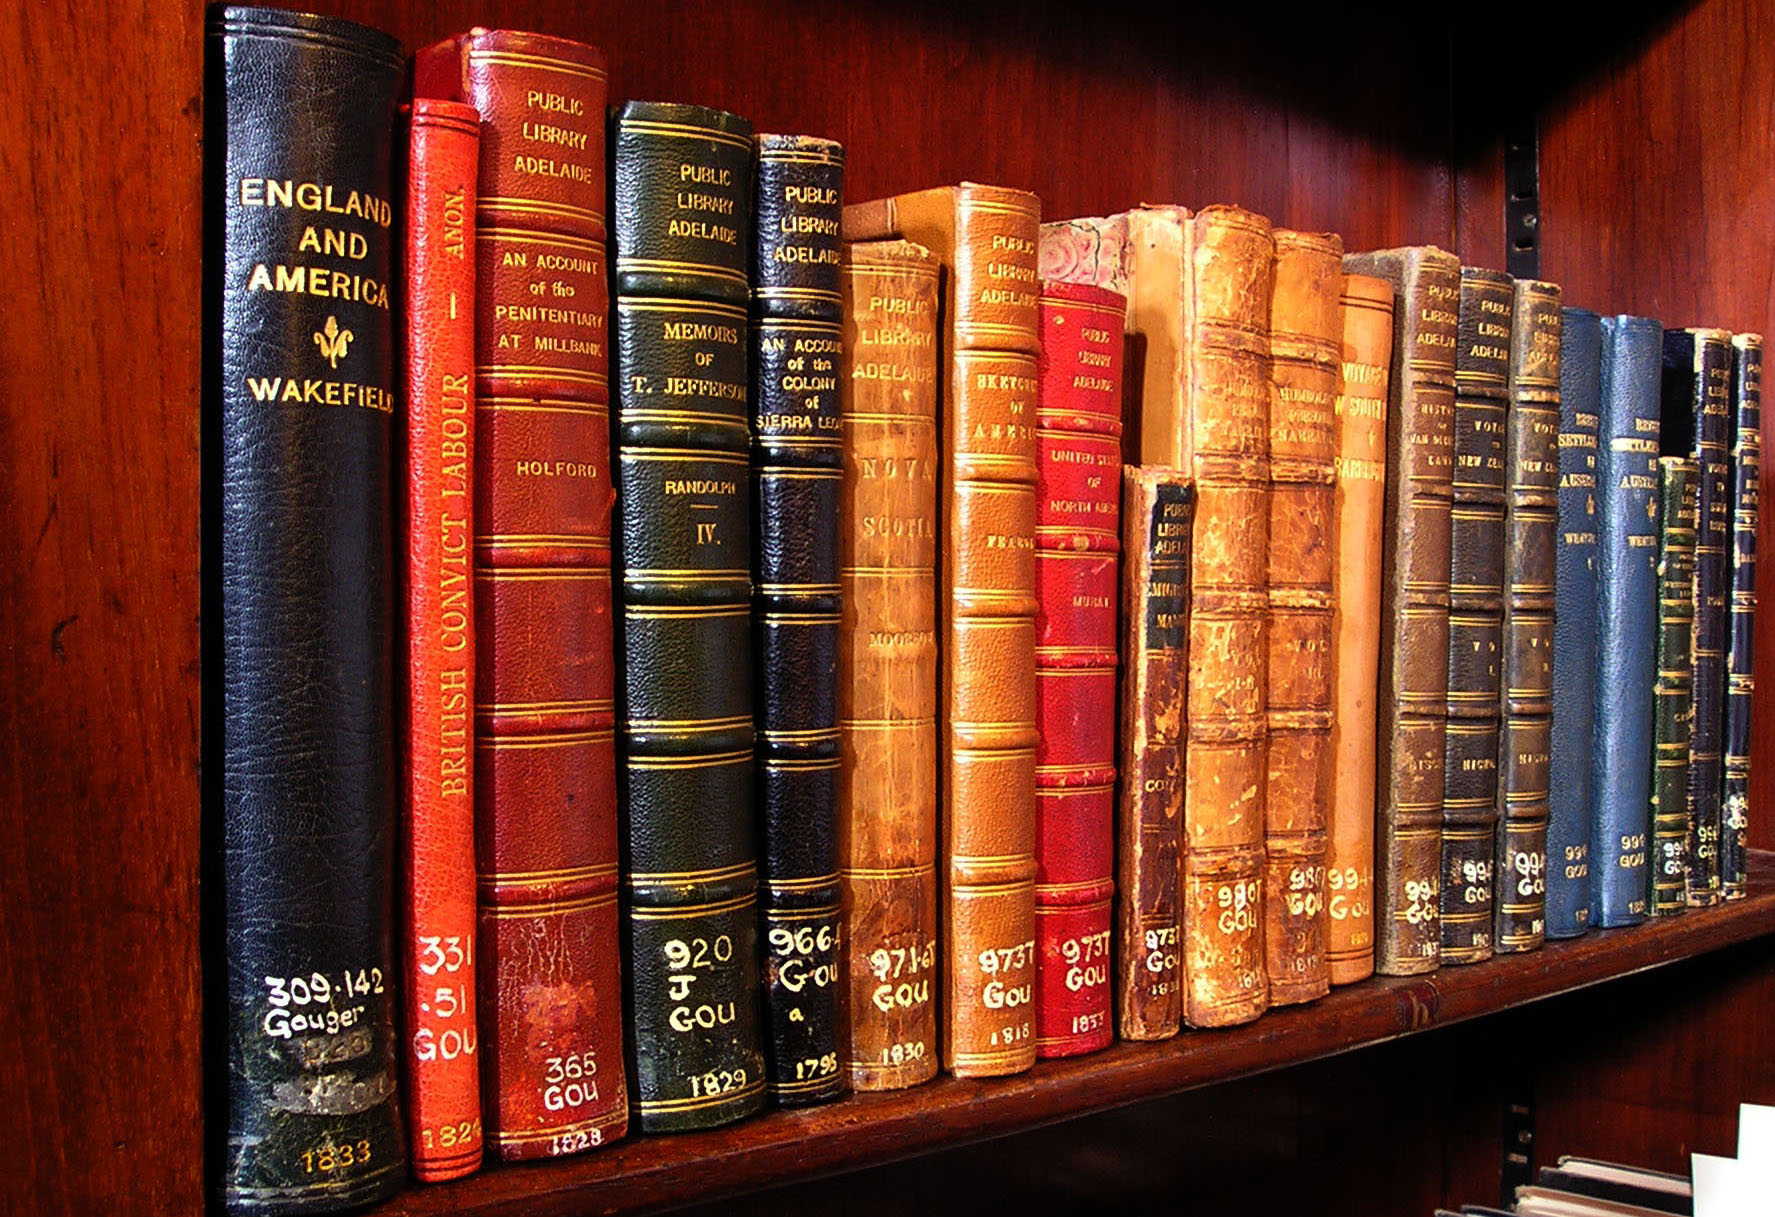 Original books that commenced the State Library's collection